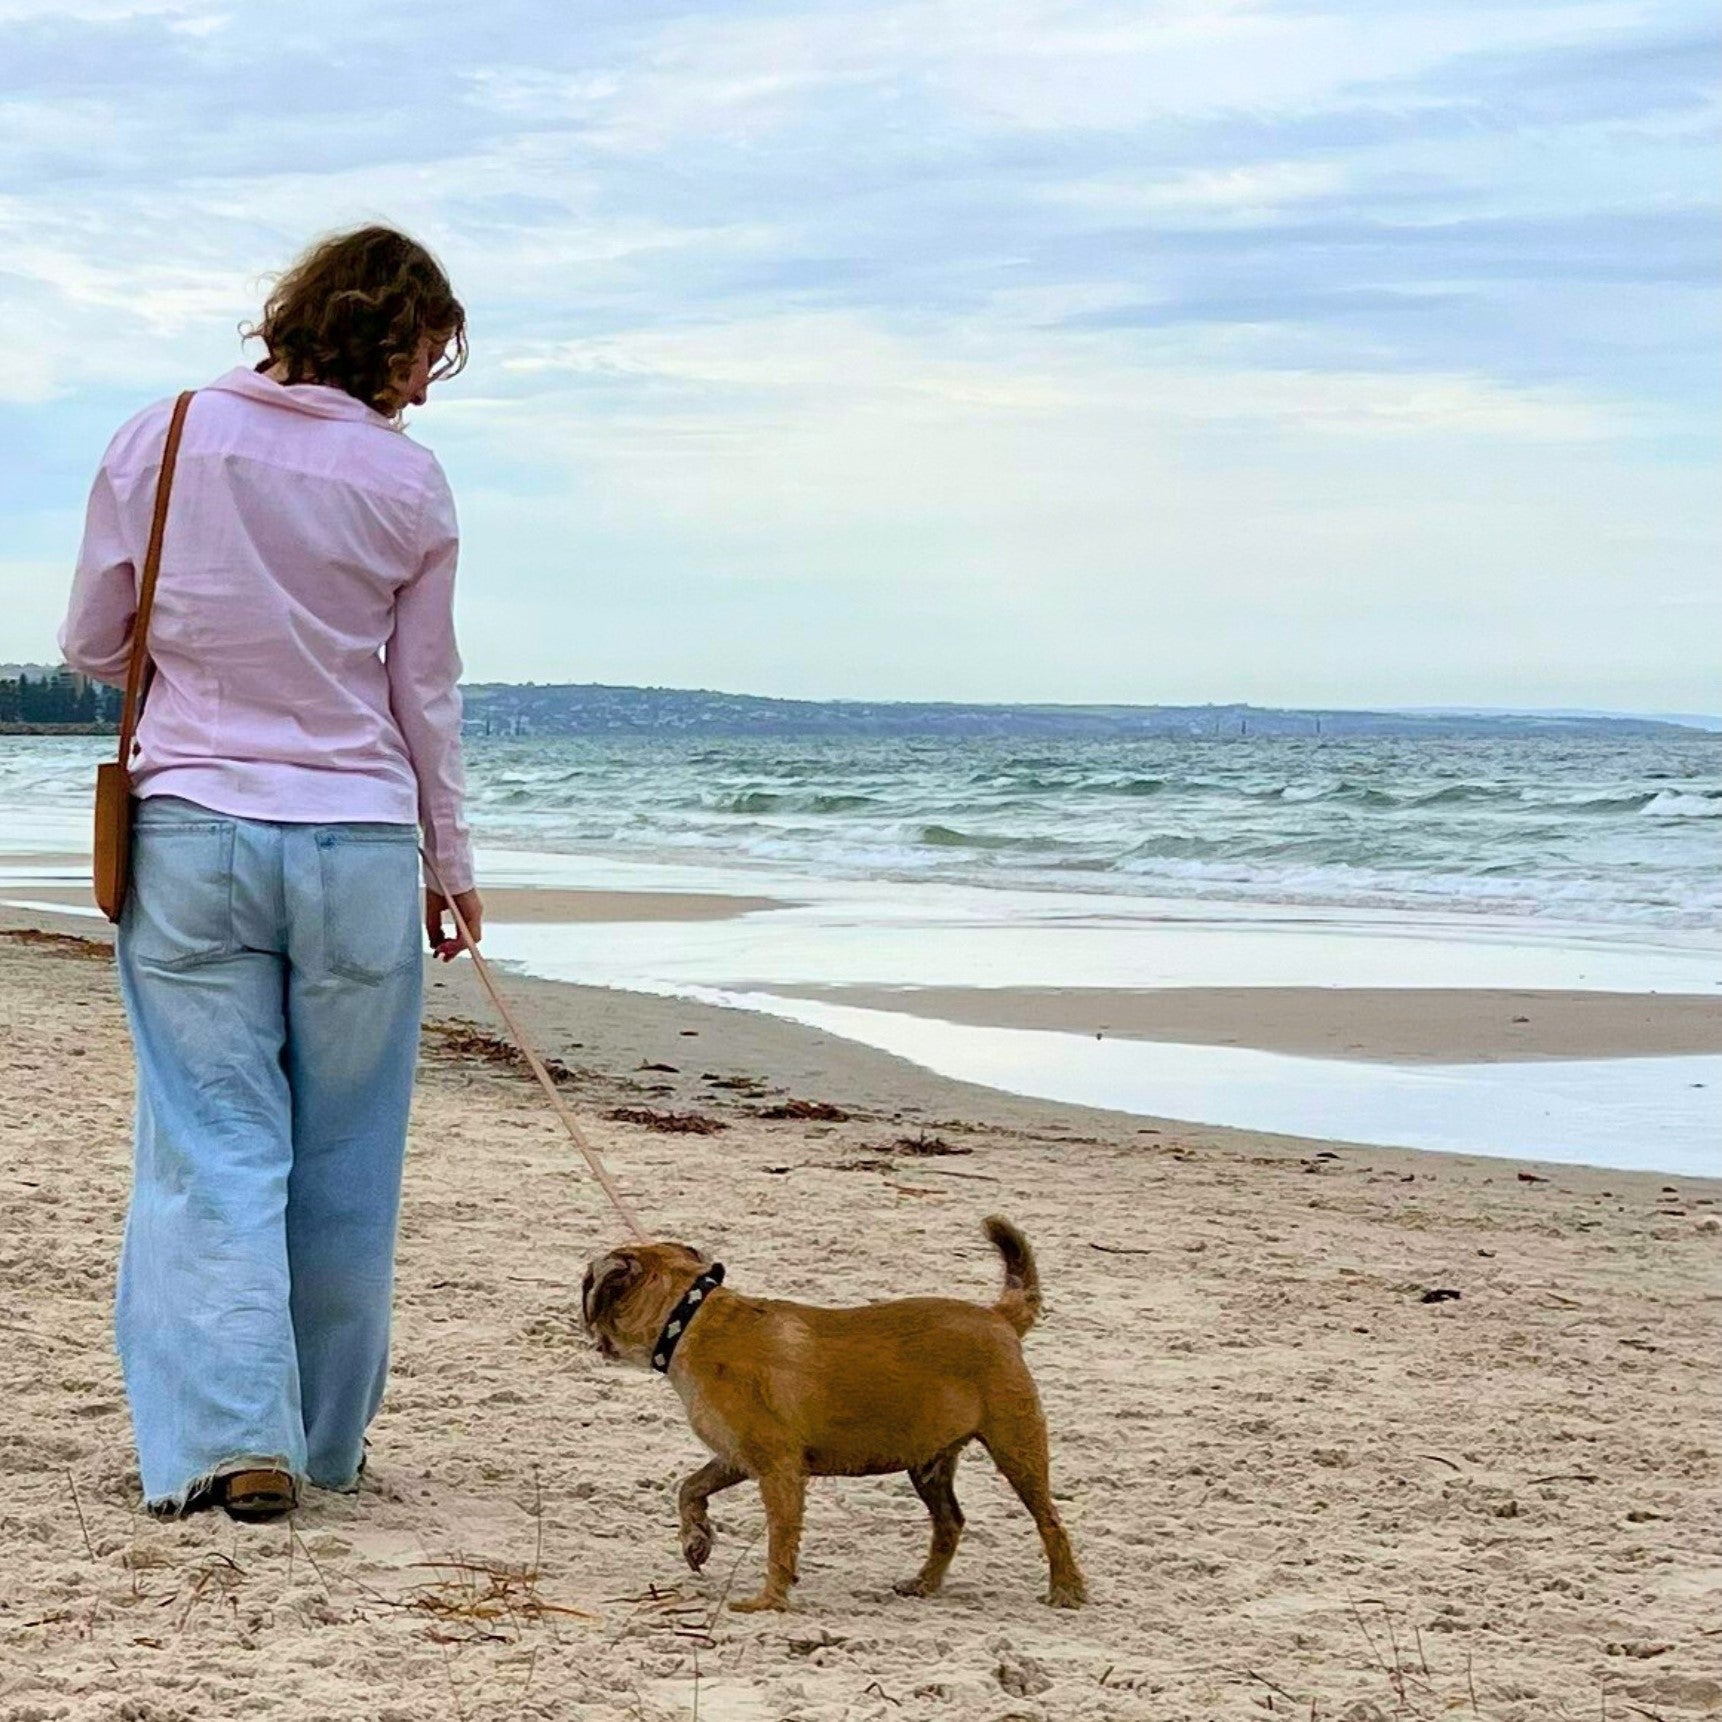 A person with shoulder-length hair, wearing a pink shirt and blue jeans, walks a small brown dog on a Georgie Paws Dog Walk Bag - Raw veg tanned leather leash along a sandy beach. The ocean and a cloudy sky provide the backdrop.